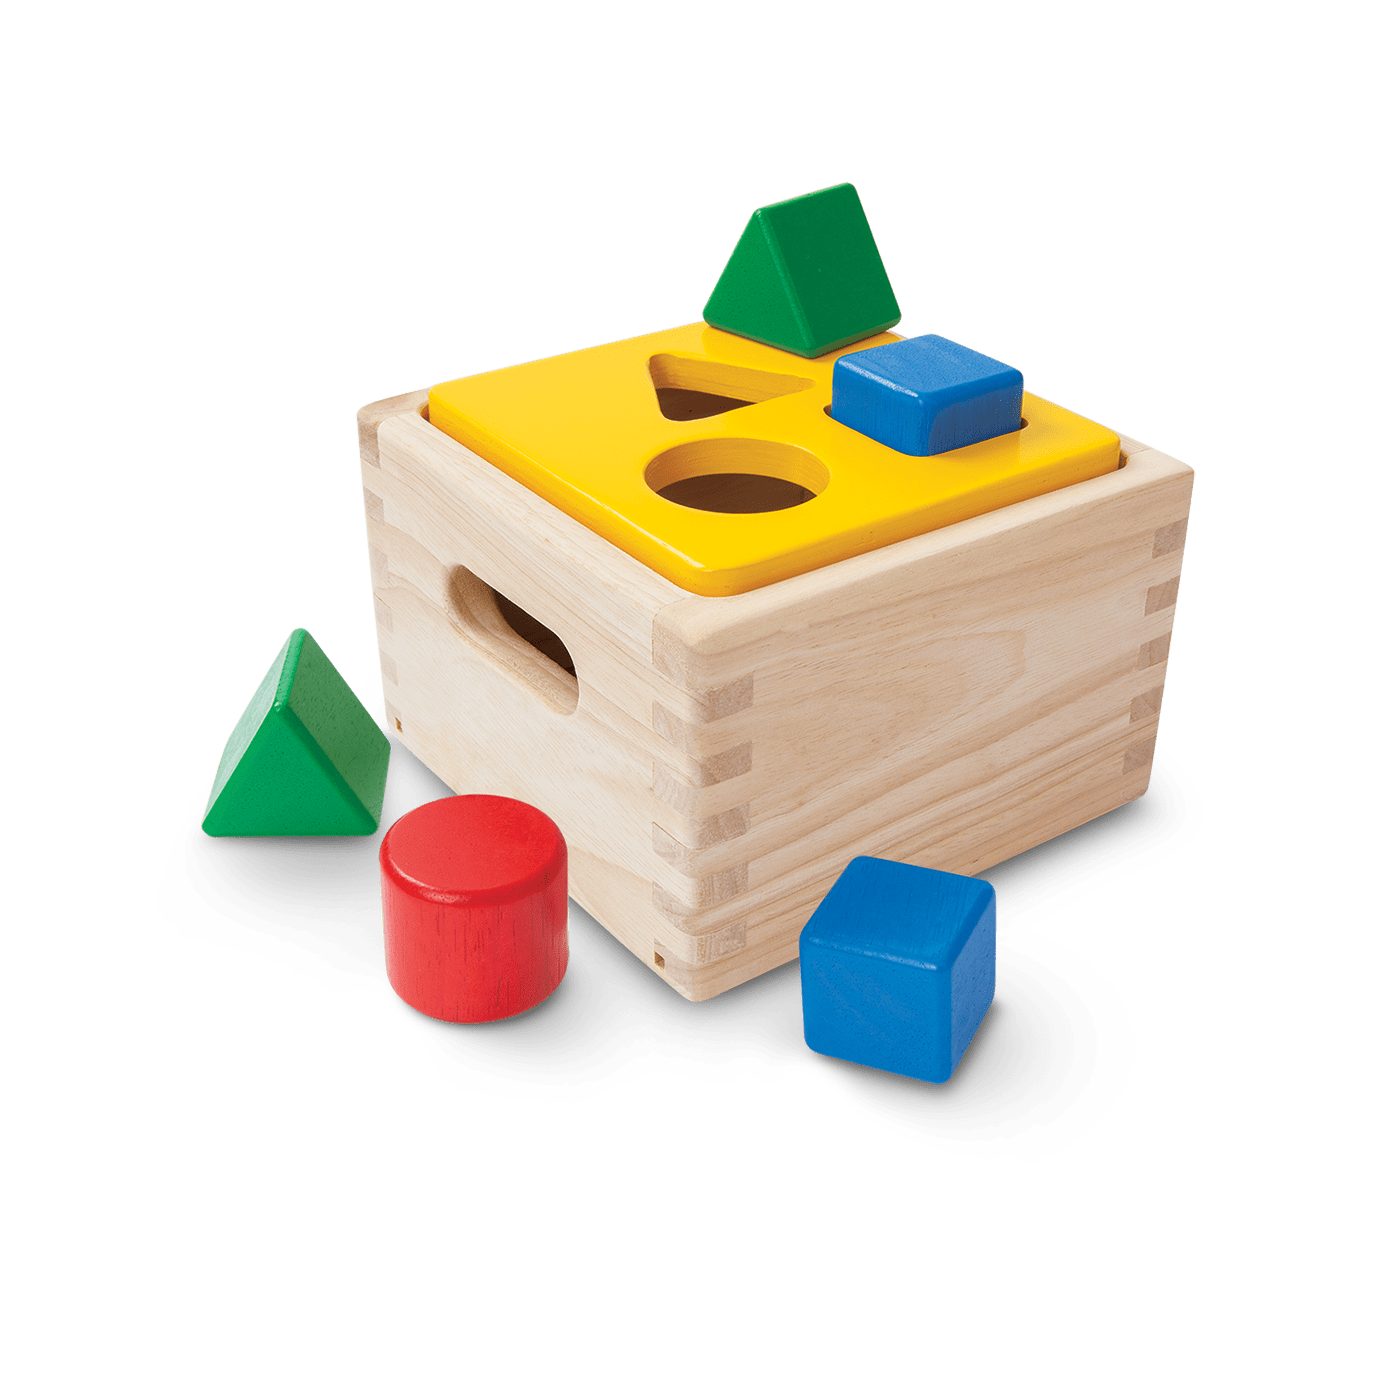 9430_PlanToys_SHAPE_and_SORT_IT_OUT_Learning_and_Education_Mathematical_Fine_Motor_Language_and_Communications_12m_Wooden_toys_Education_toys_Safety_Toys_Non-toxic_0_1800x1800.png